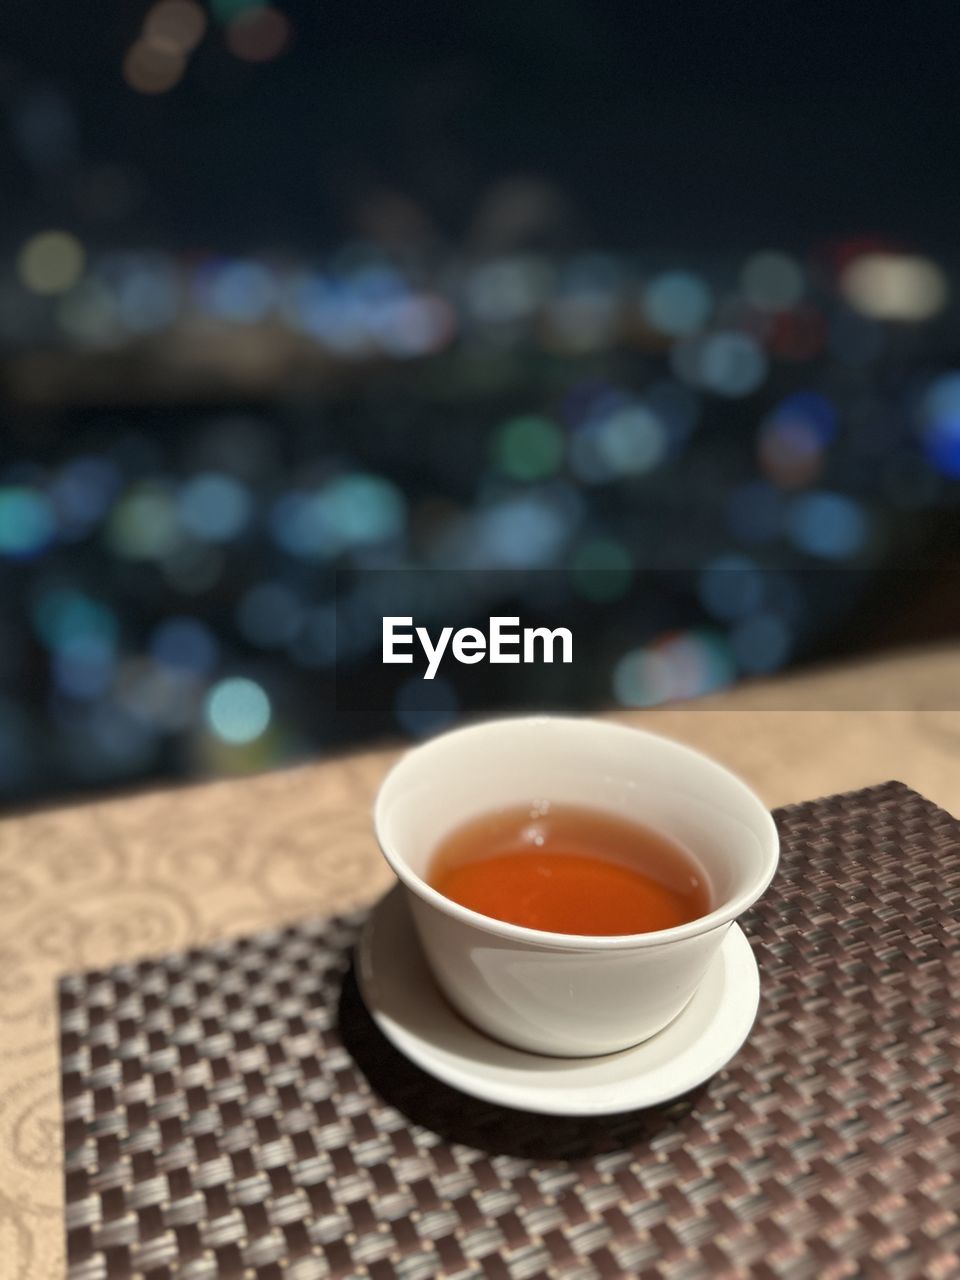 drink, cup, food and drink, mug, tea, refreshment, hot drink, tea cup, da hong pao, crockery, table, focus on foreground, no people, coffee, close-up, oolong, saucer, indoors, relaxation, coffee cup, food, freshness, porcelain